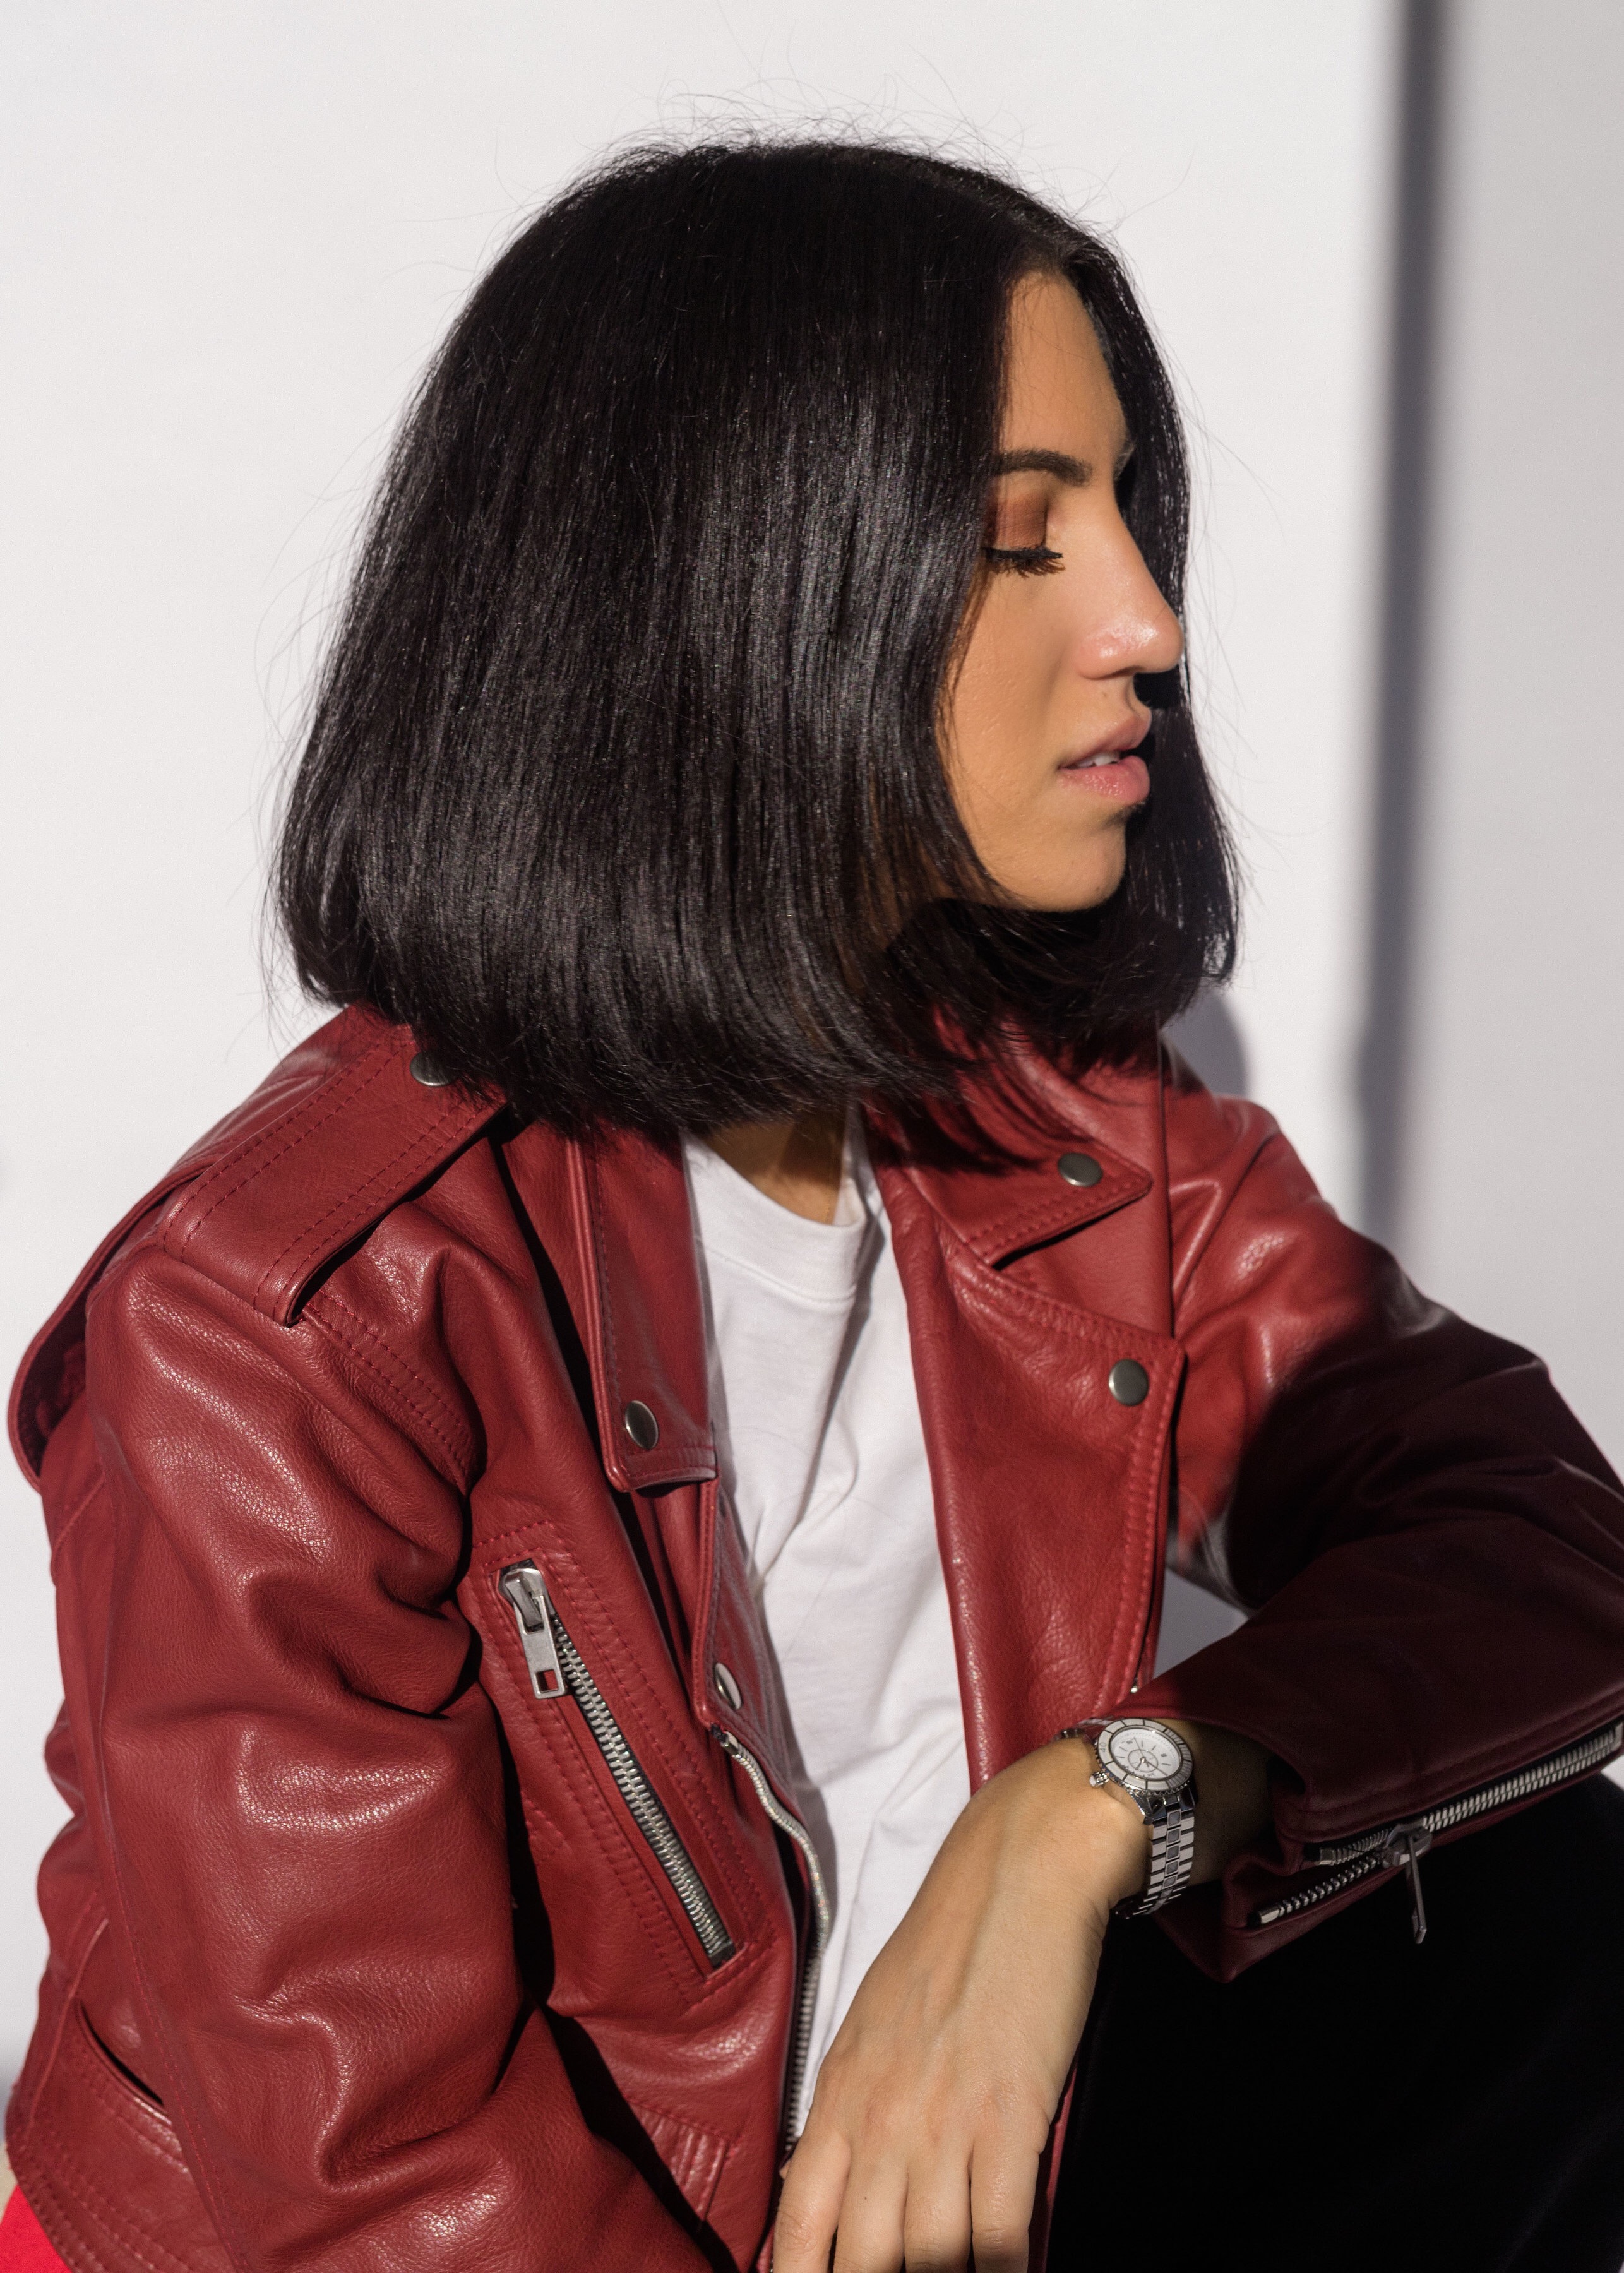 LA Blogger Tania Sarin featuring beauty brand Herbal Essences and showing off major hair goals in red leather jacket and shadow photography.